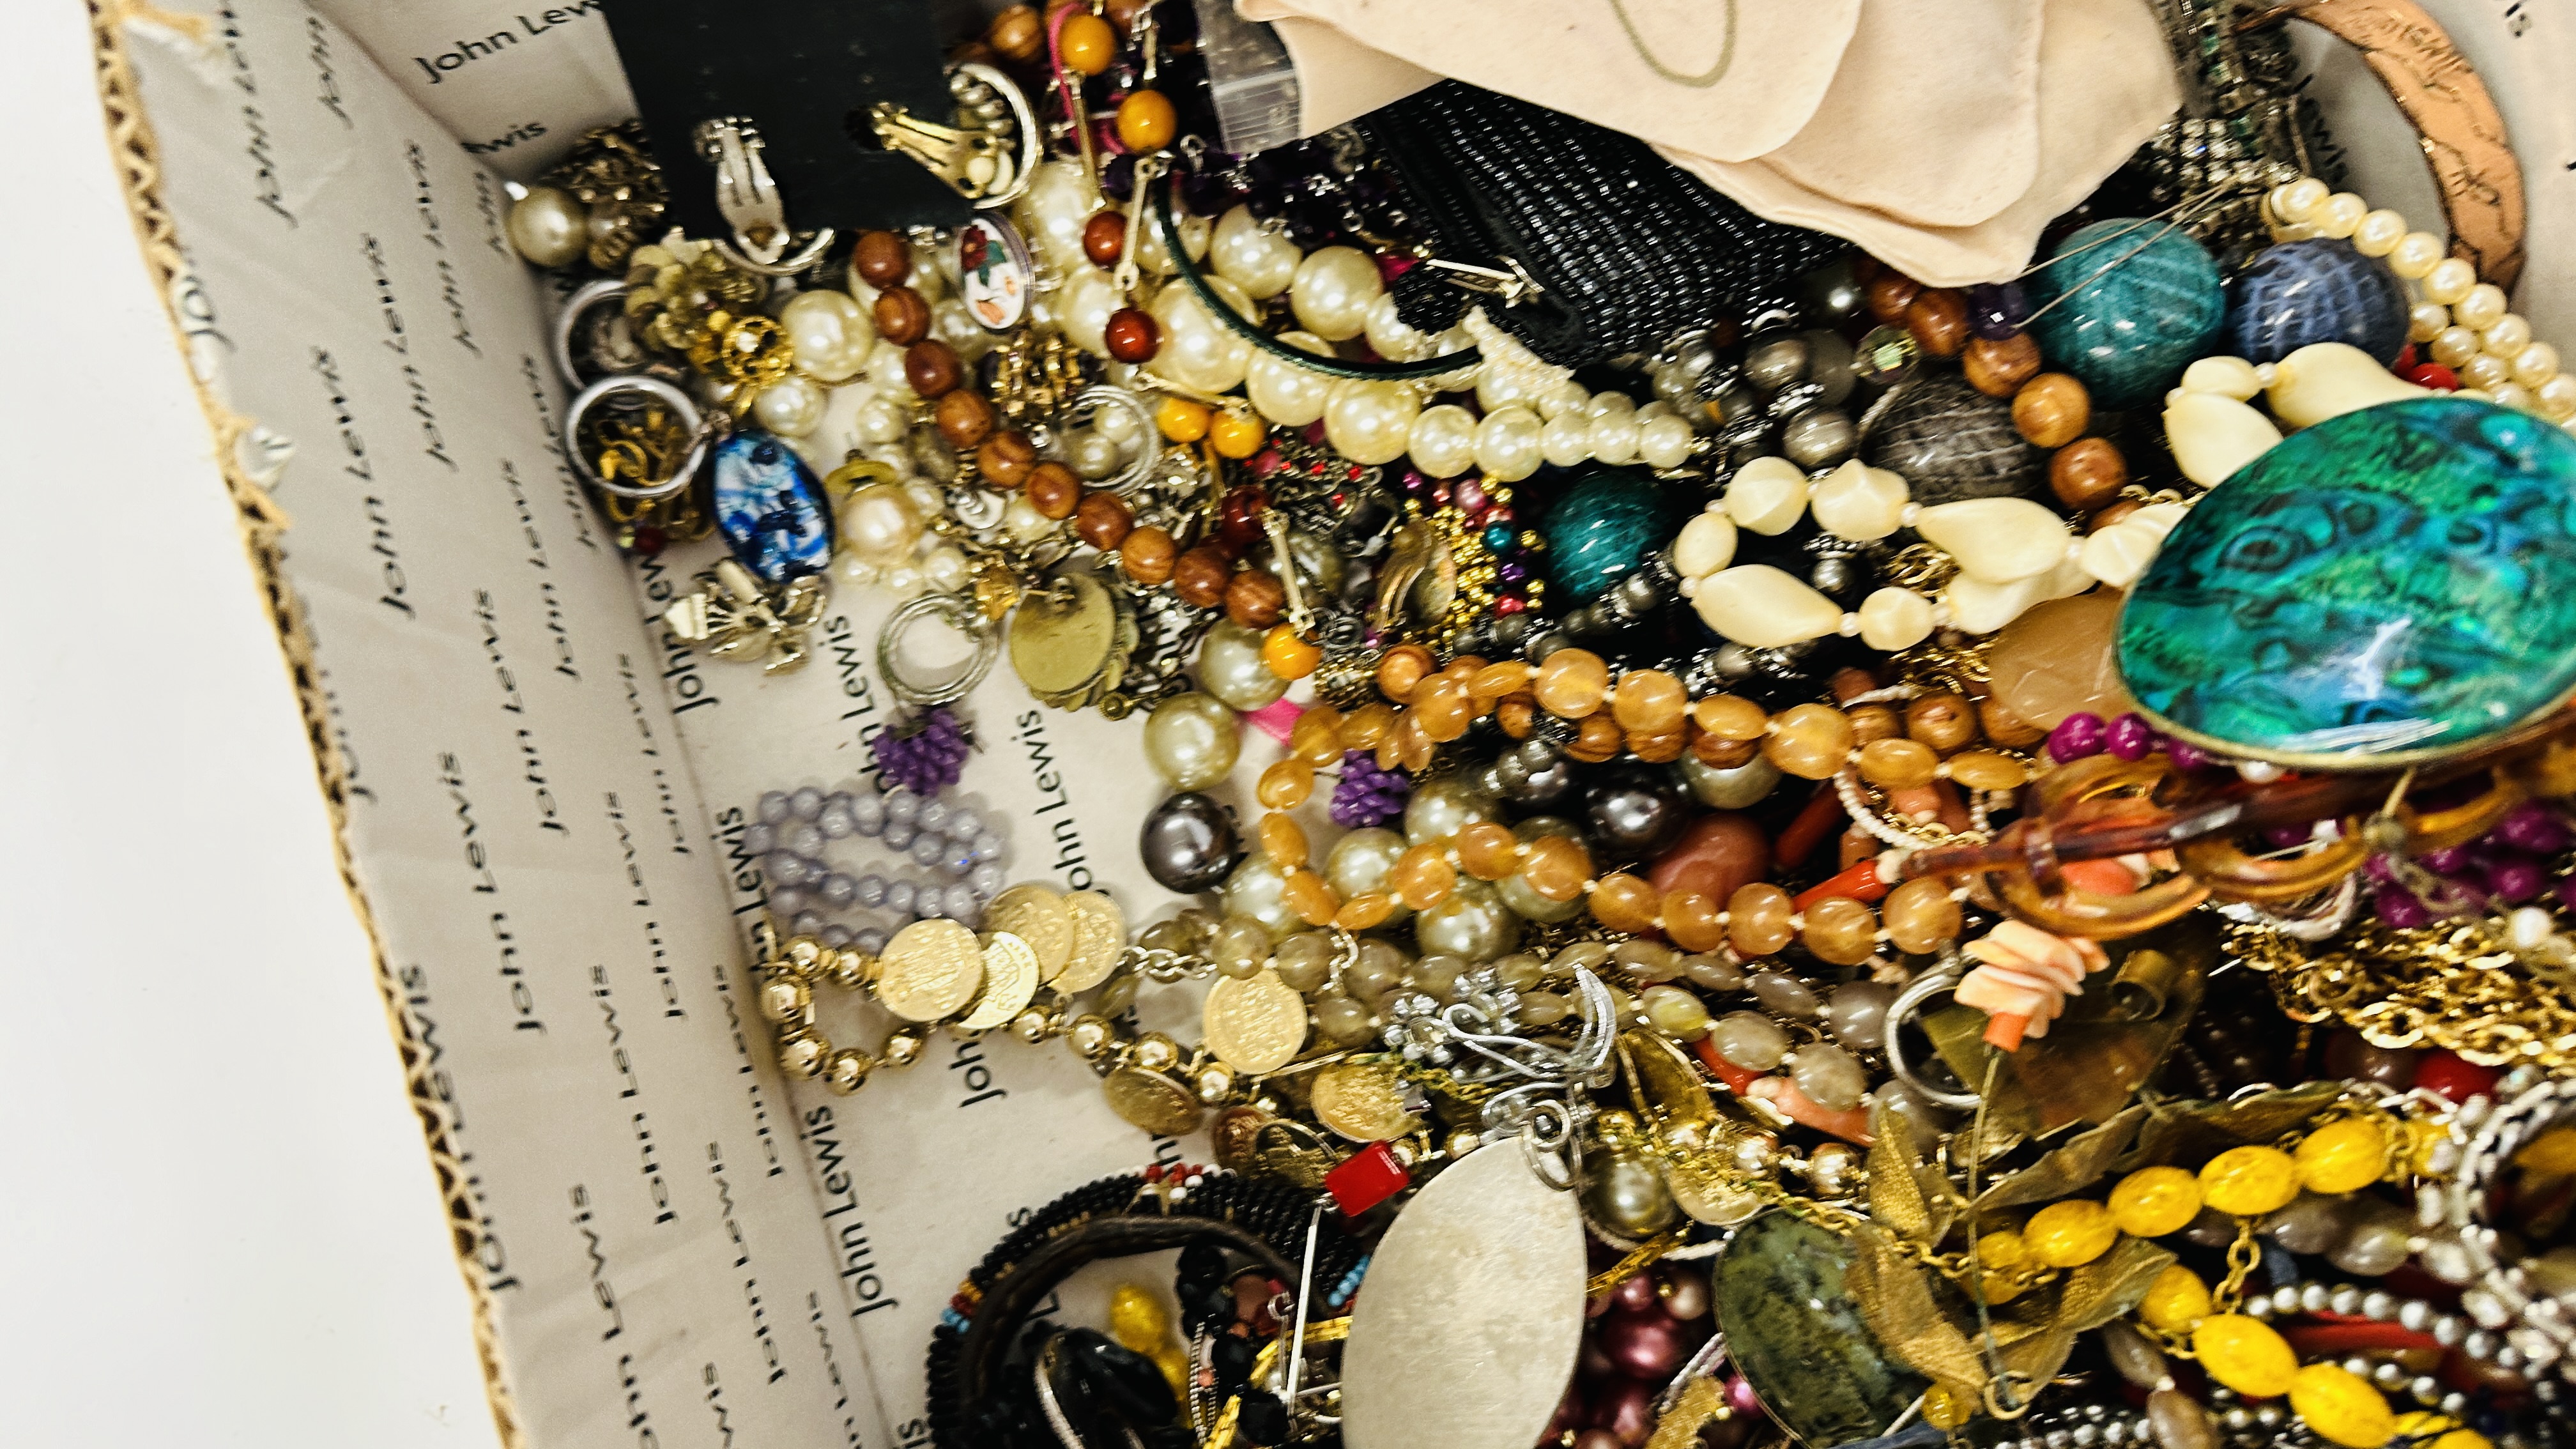 A LARGE BOX OF VINTAGE COSTUME JEWELLERY TO INCLUDE NECKLACES, BRACELETS, BEADS ETC. - Image 6 of 9